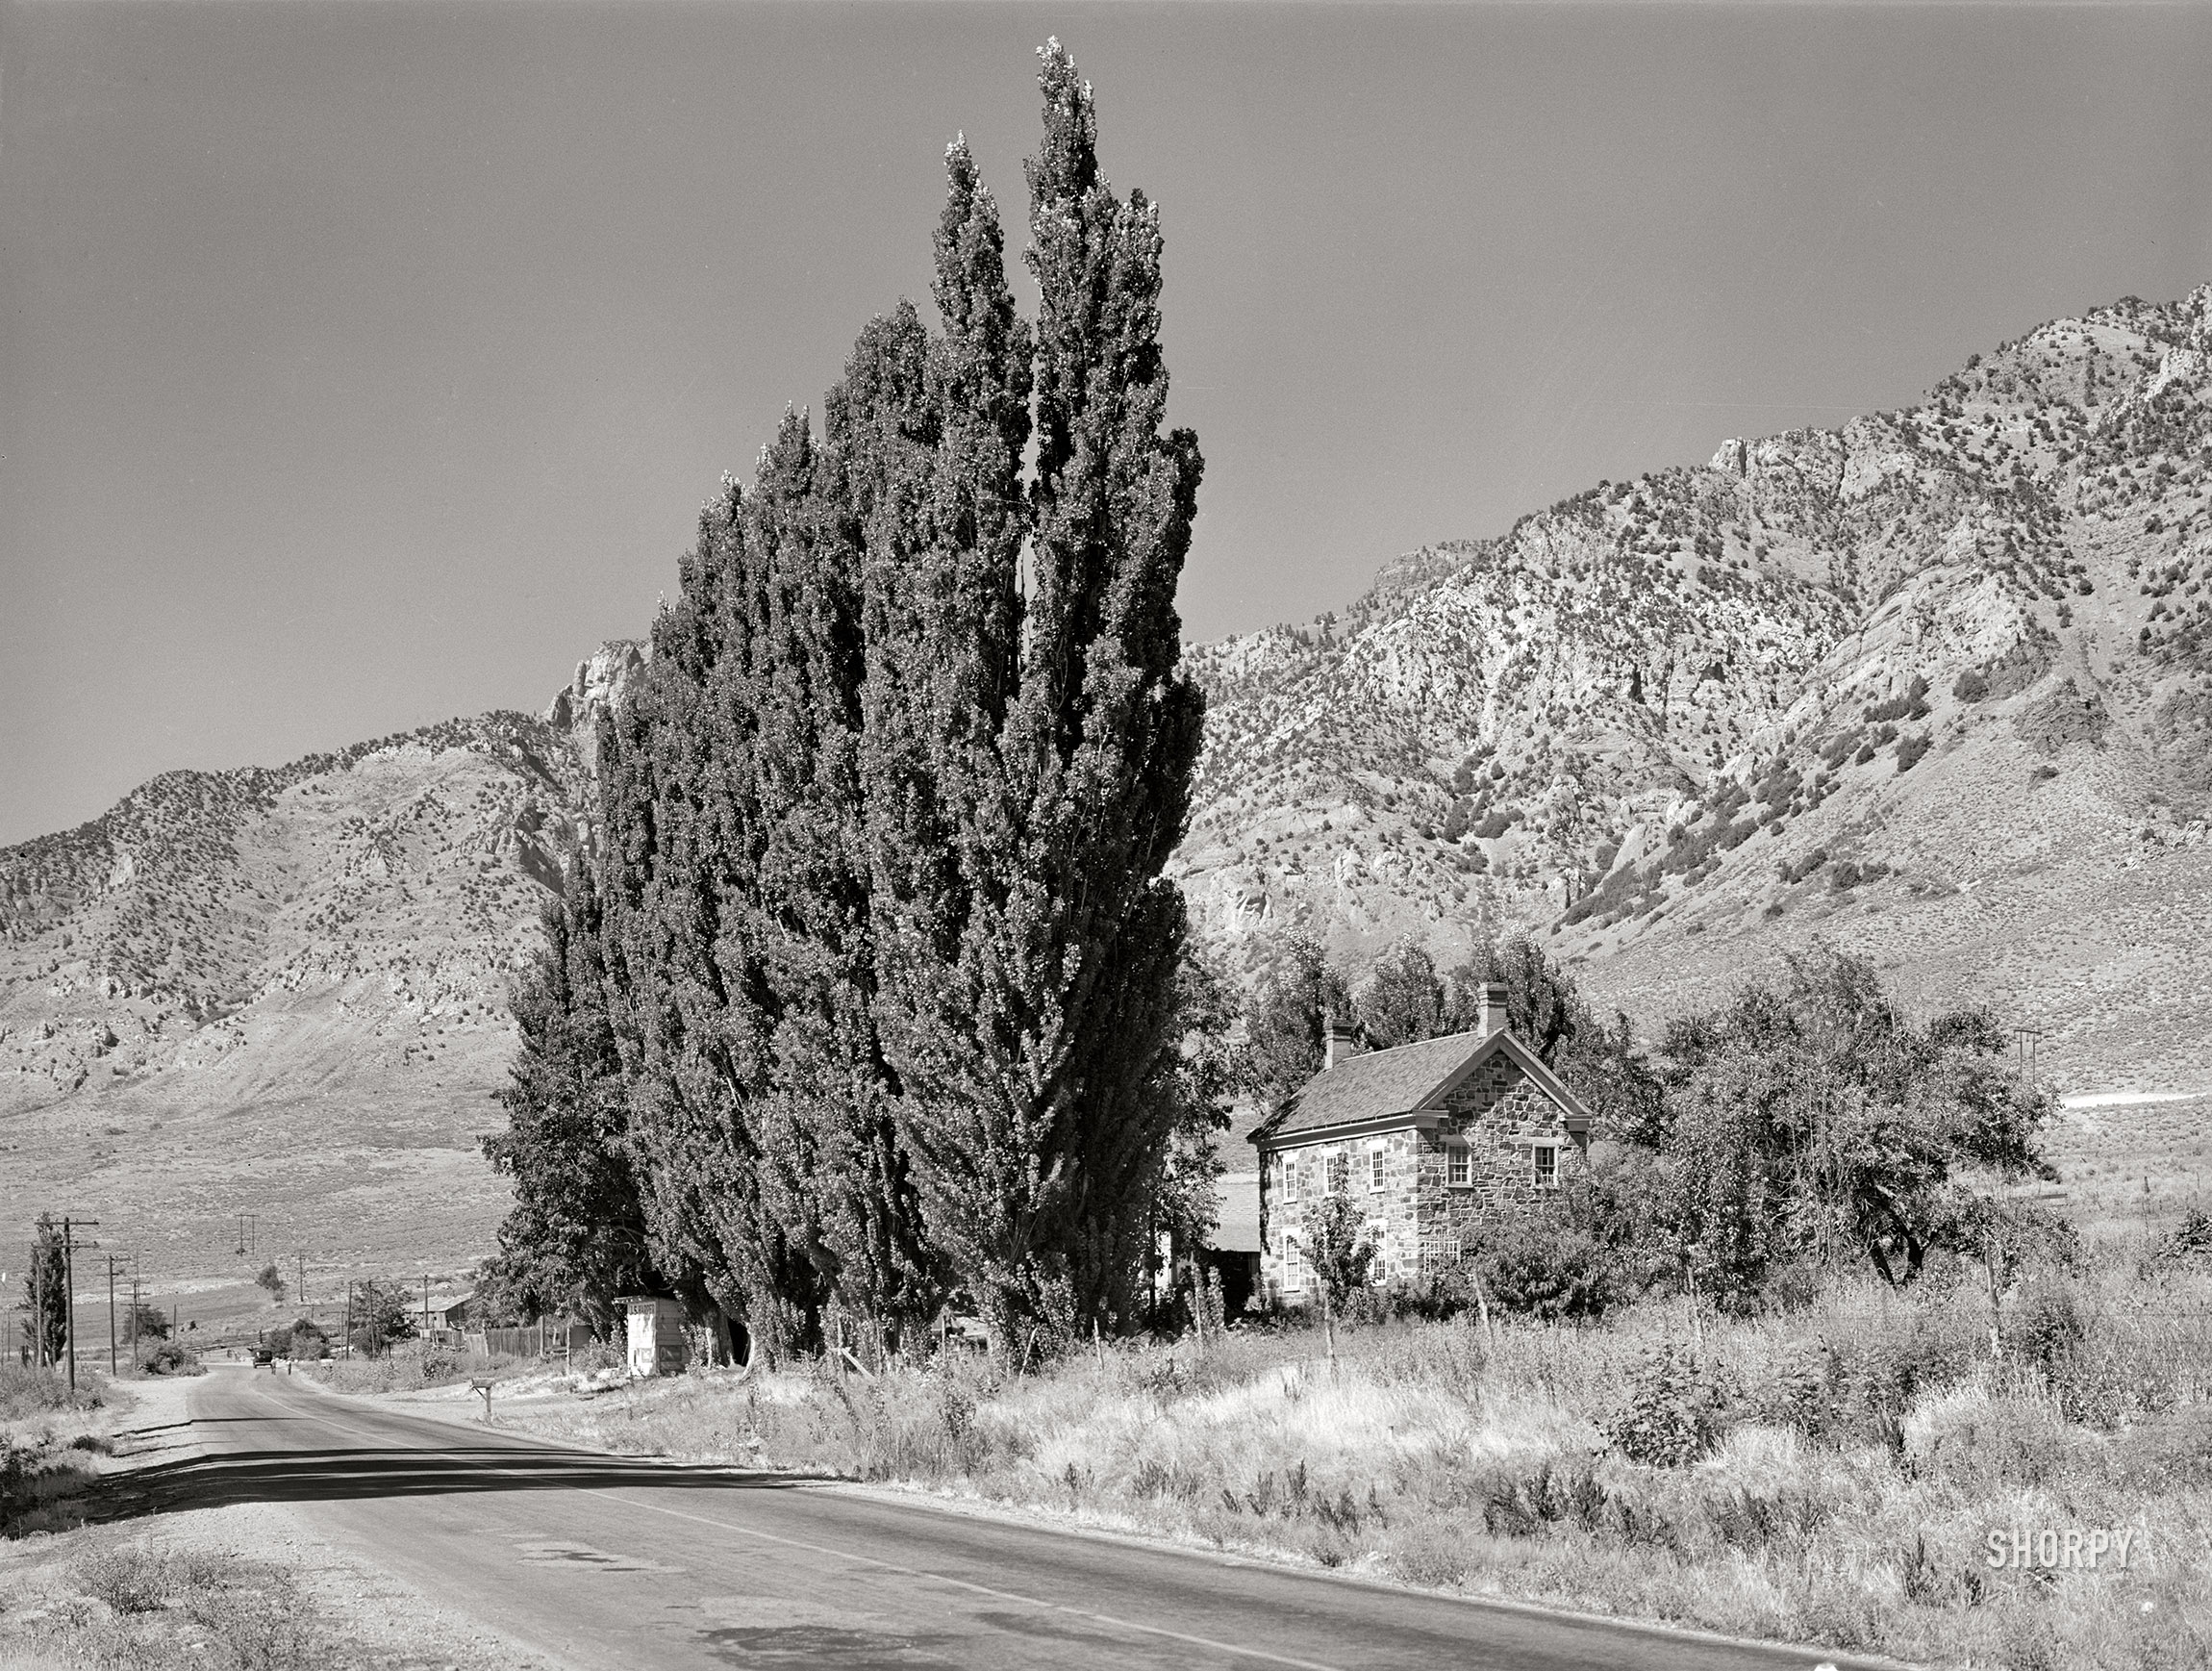 August 1940. "Rural scene with Lombardy poplars used as windbreak. Box Elder County, Utah." Acetate negative by Russell Lee for the Farm Security Administration. View full size.